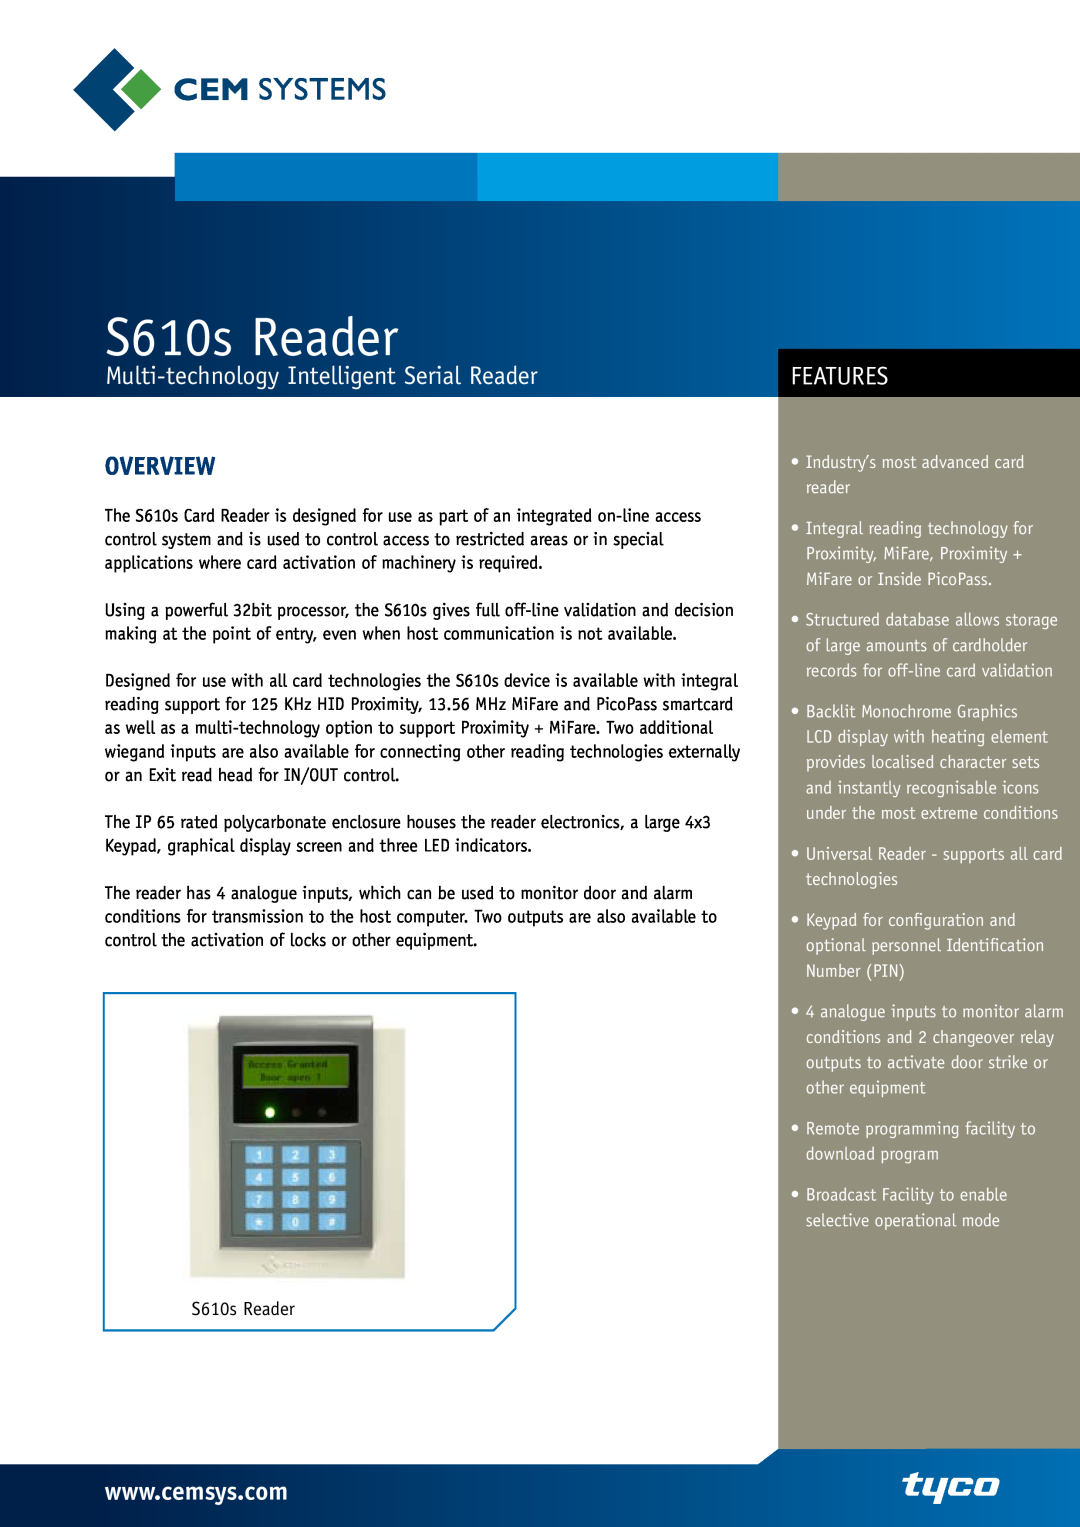 Tyco manual Overview, S610s Reader, Multi-technology Intelligent Serial Reader, Features, Backlit Monochrome Graphics 